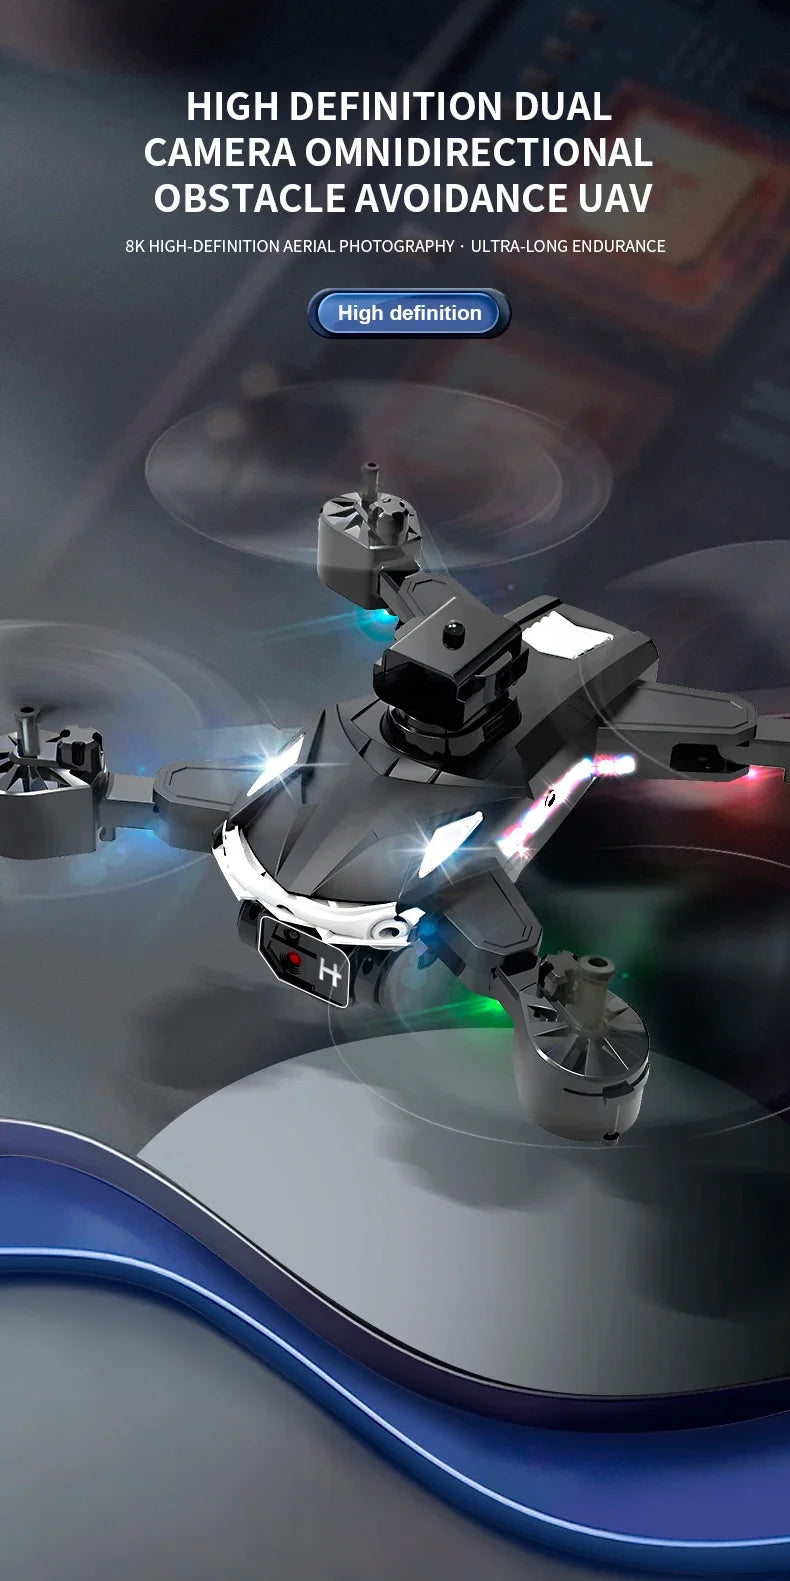 109L Drone, high definition dual camera omnidirectional obstacle avoidance uav